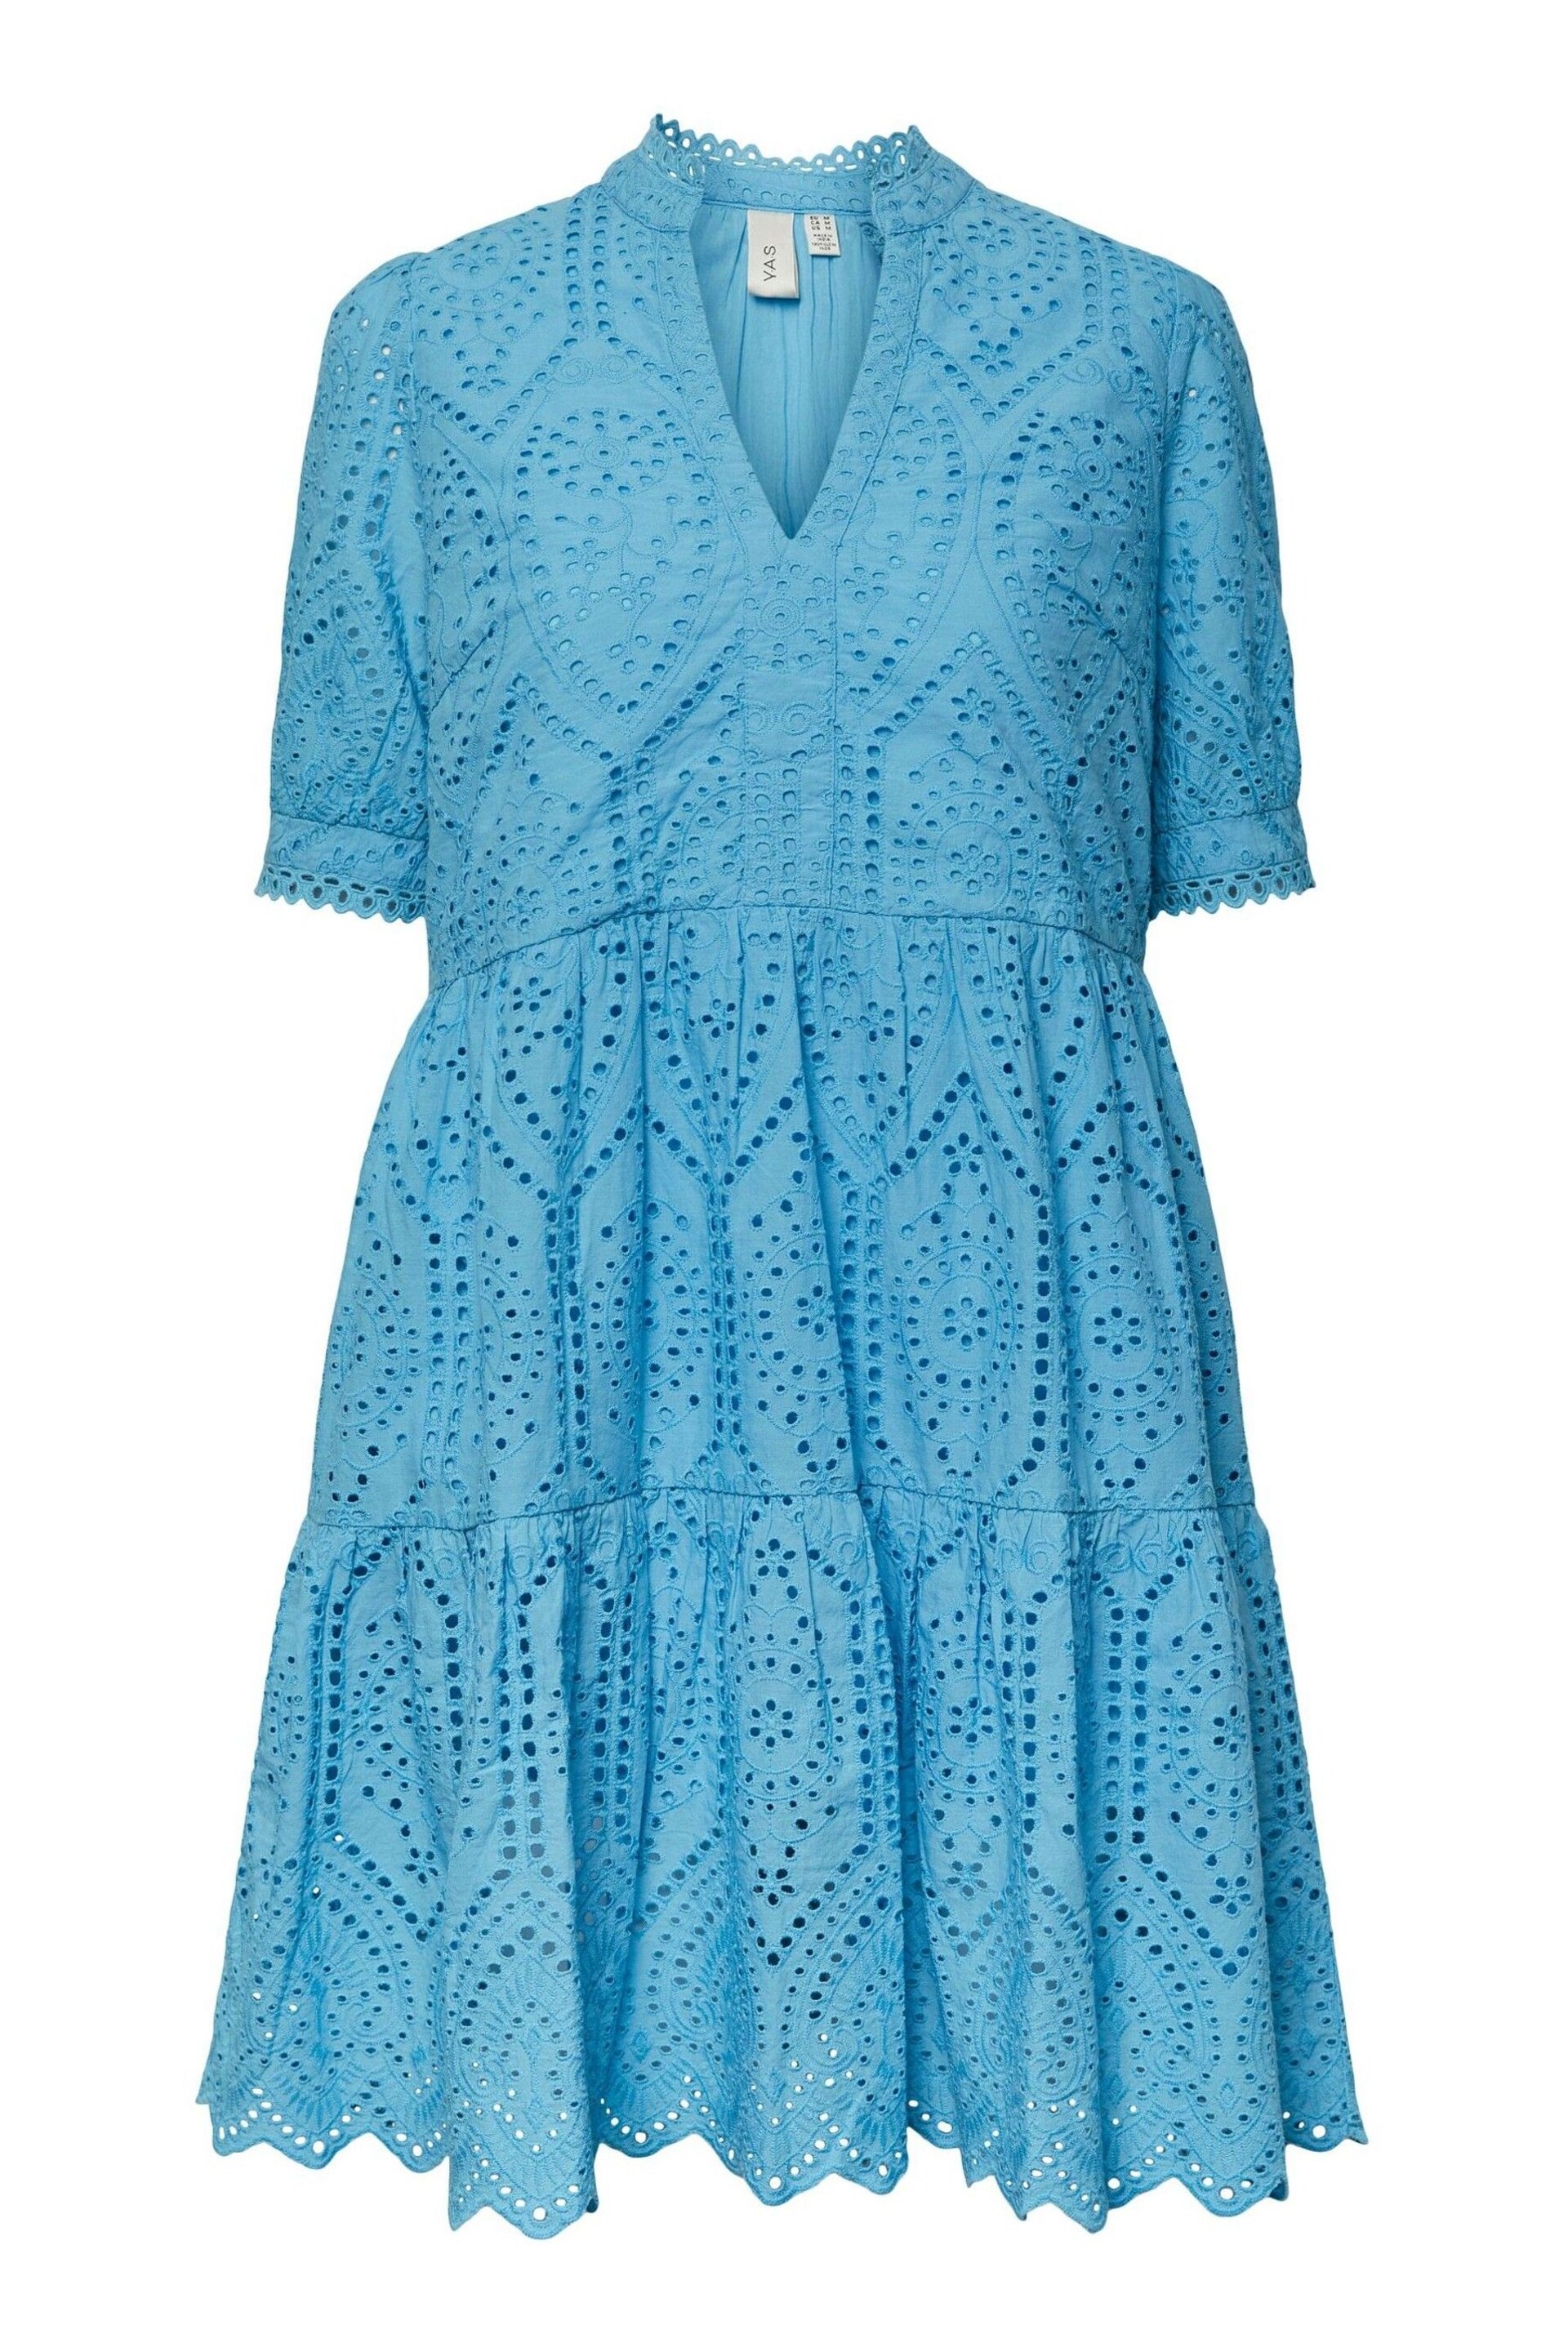 Y.A.S Blue Short Sleeve Broiderie Tiered Dress - Image 5 of 5